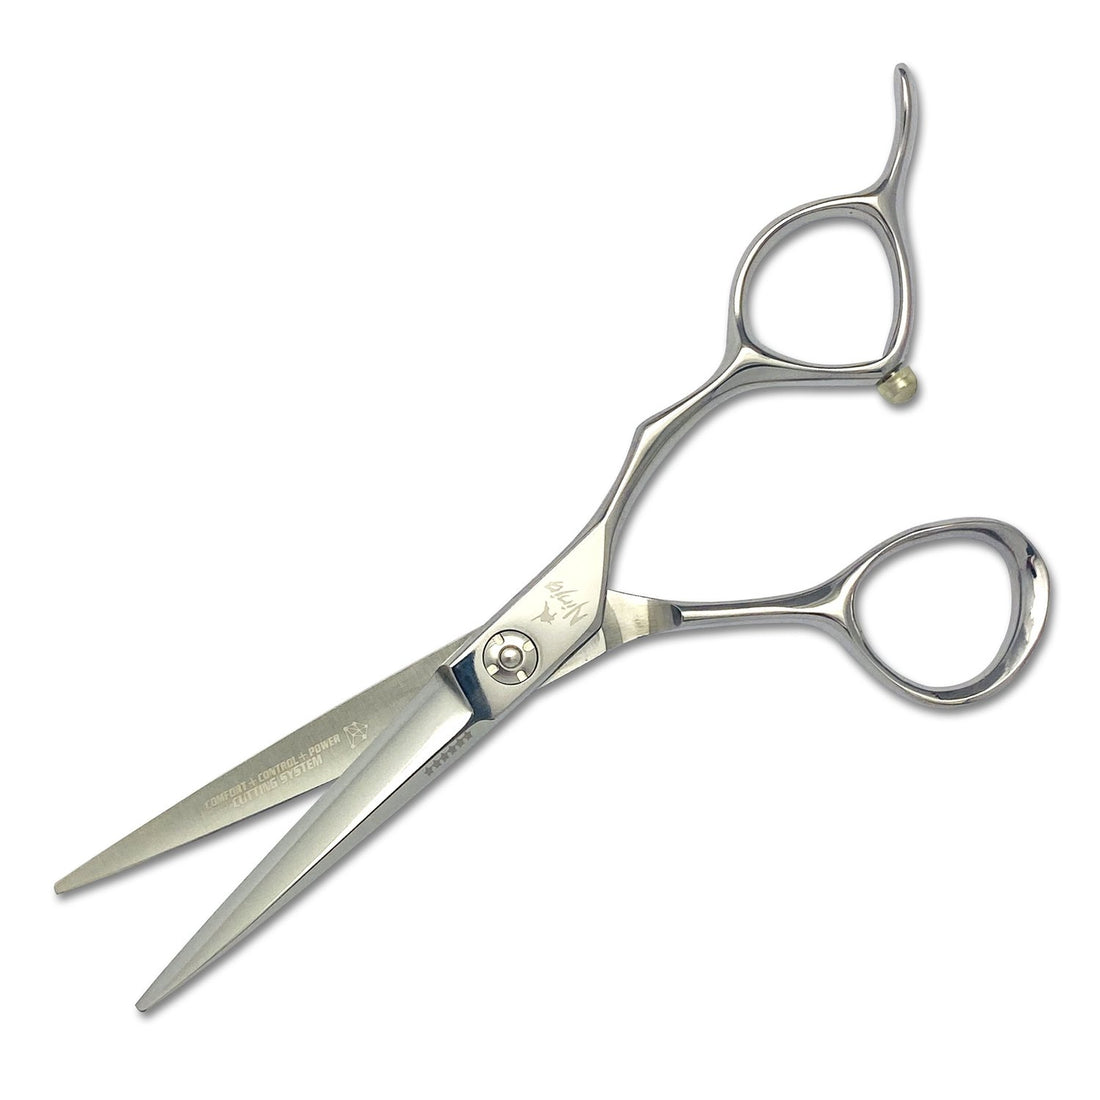 Does every Stylist need Professional Hair-Cutting Shears?